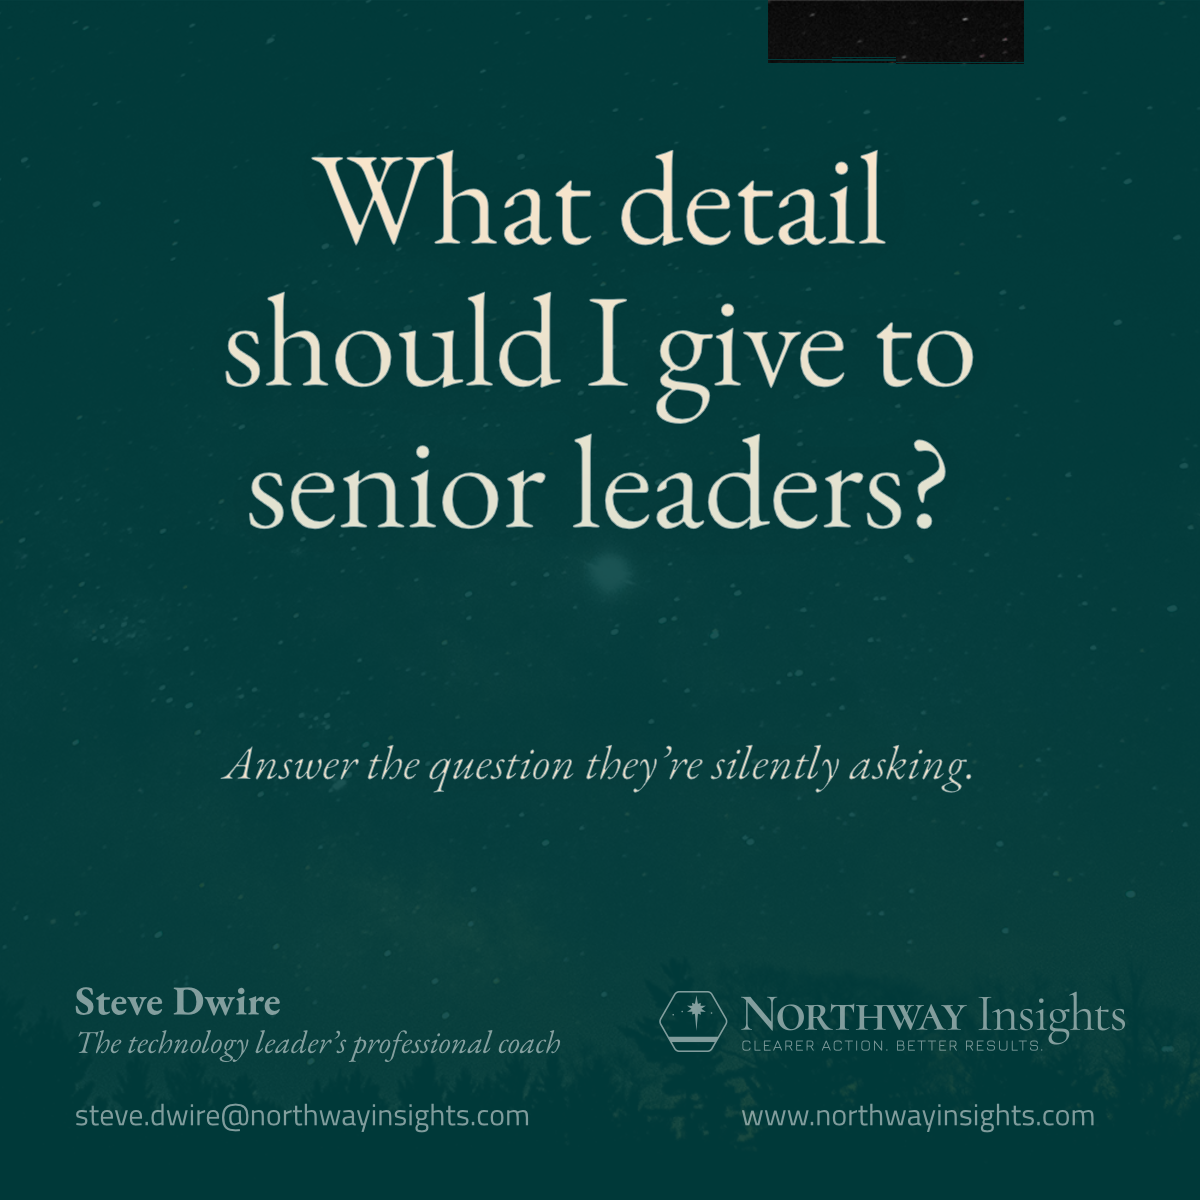 What detail should I give to senior leaders?